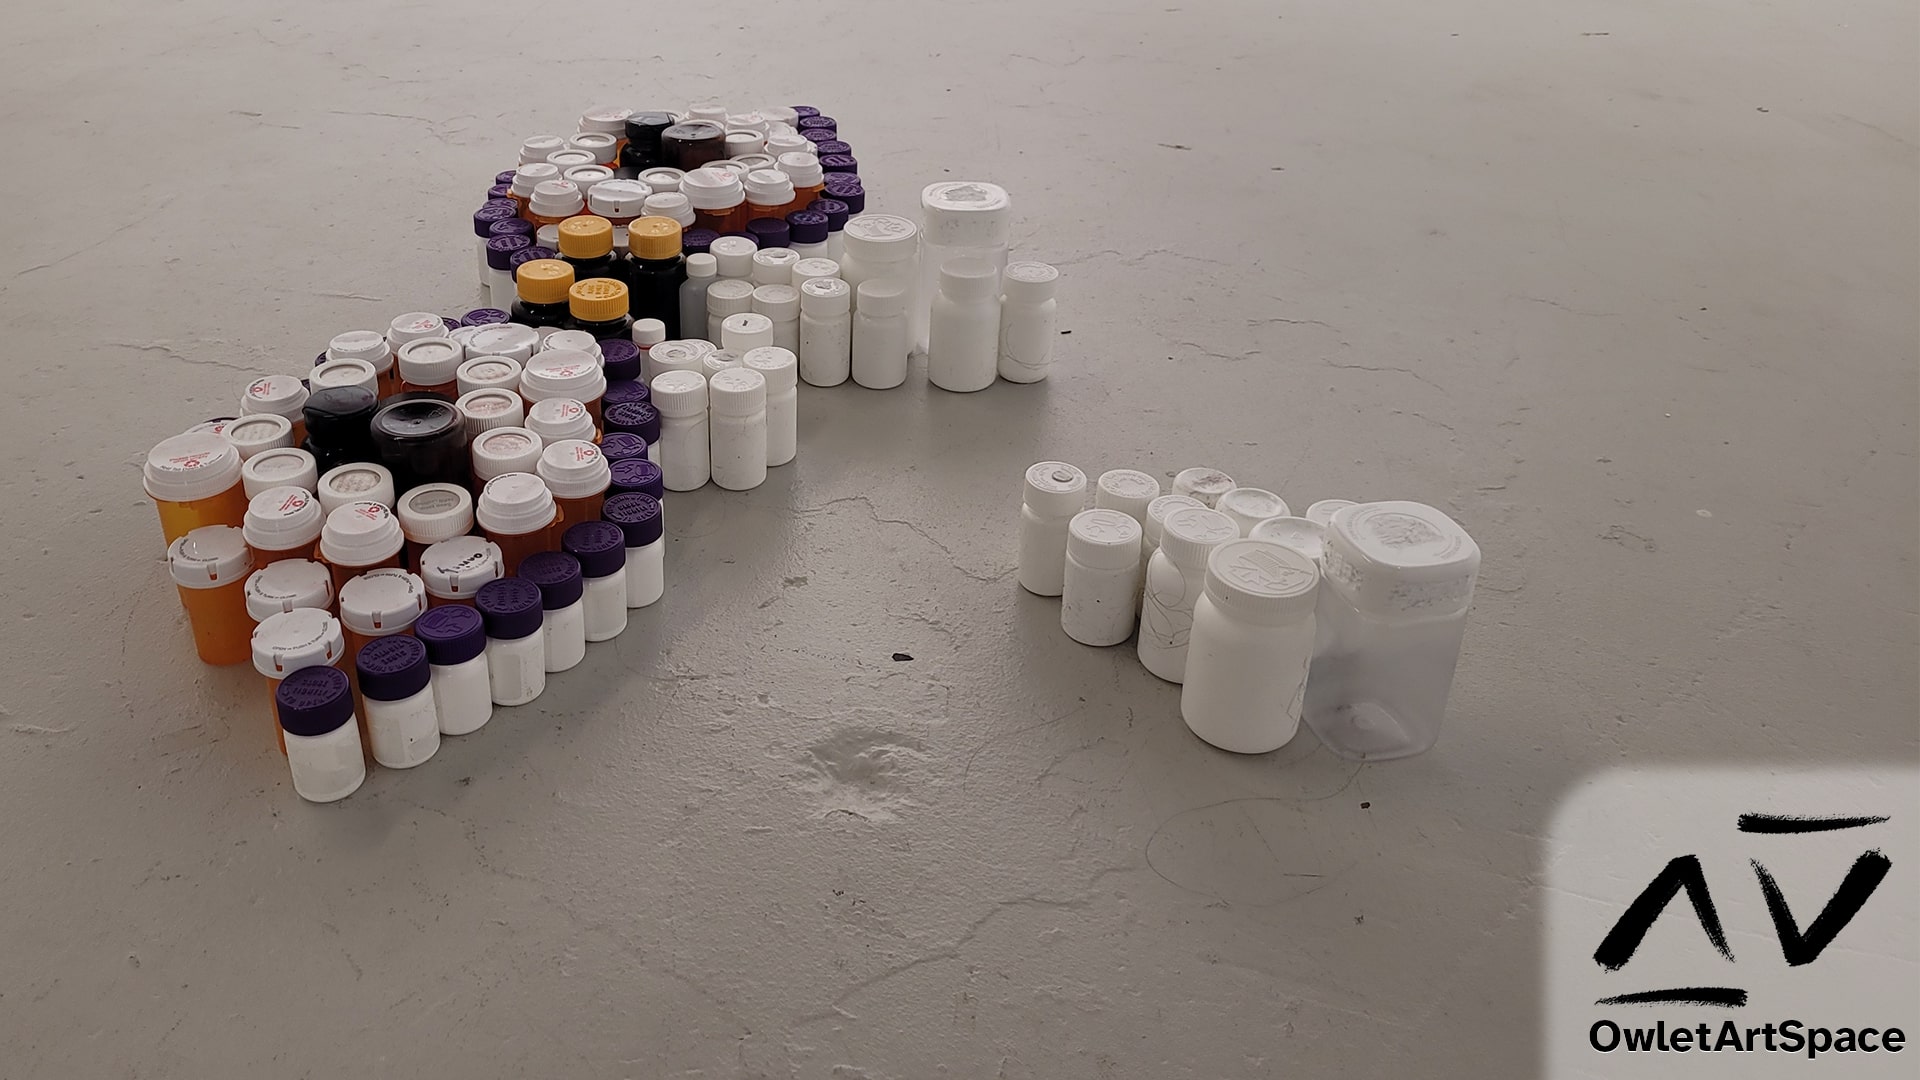 A perspective view of the Pill Bottle Mural that shows the varying heights of the pill bottles along with the sides of the bottles.